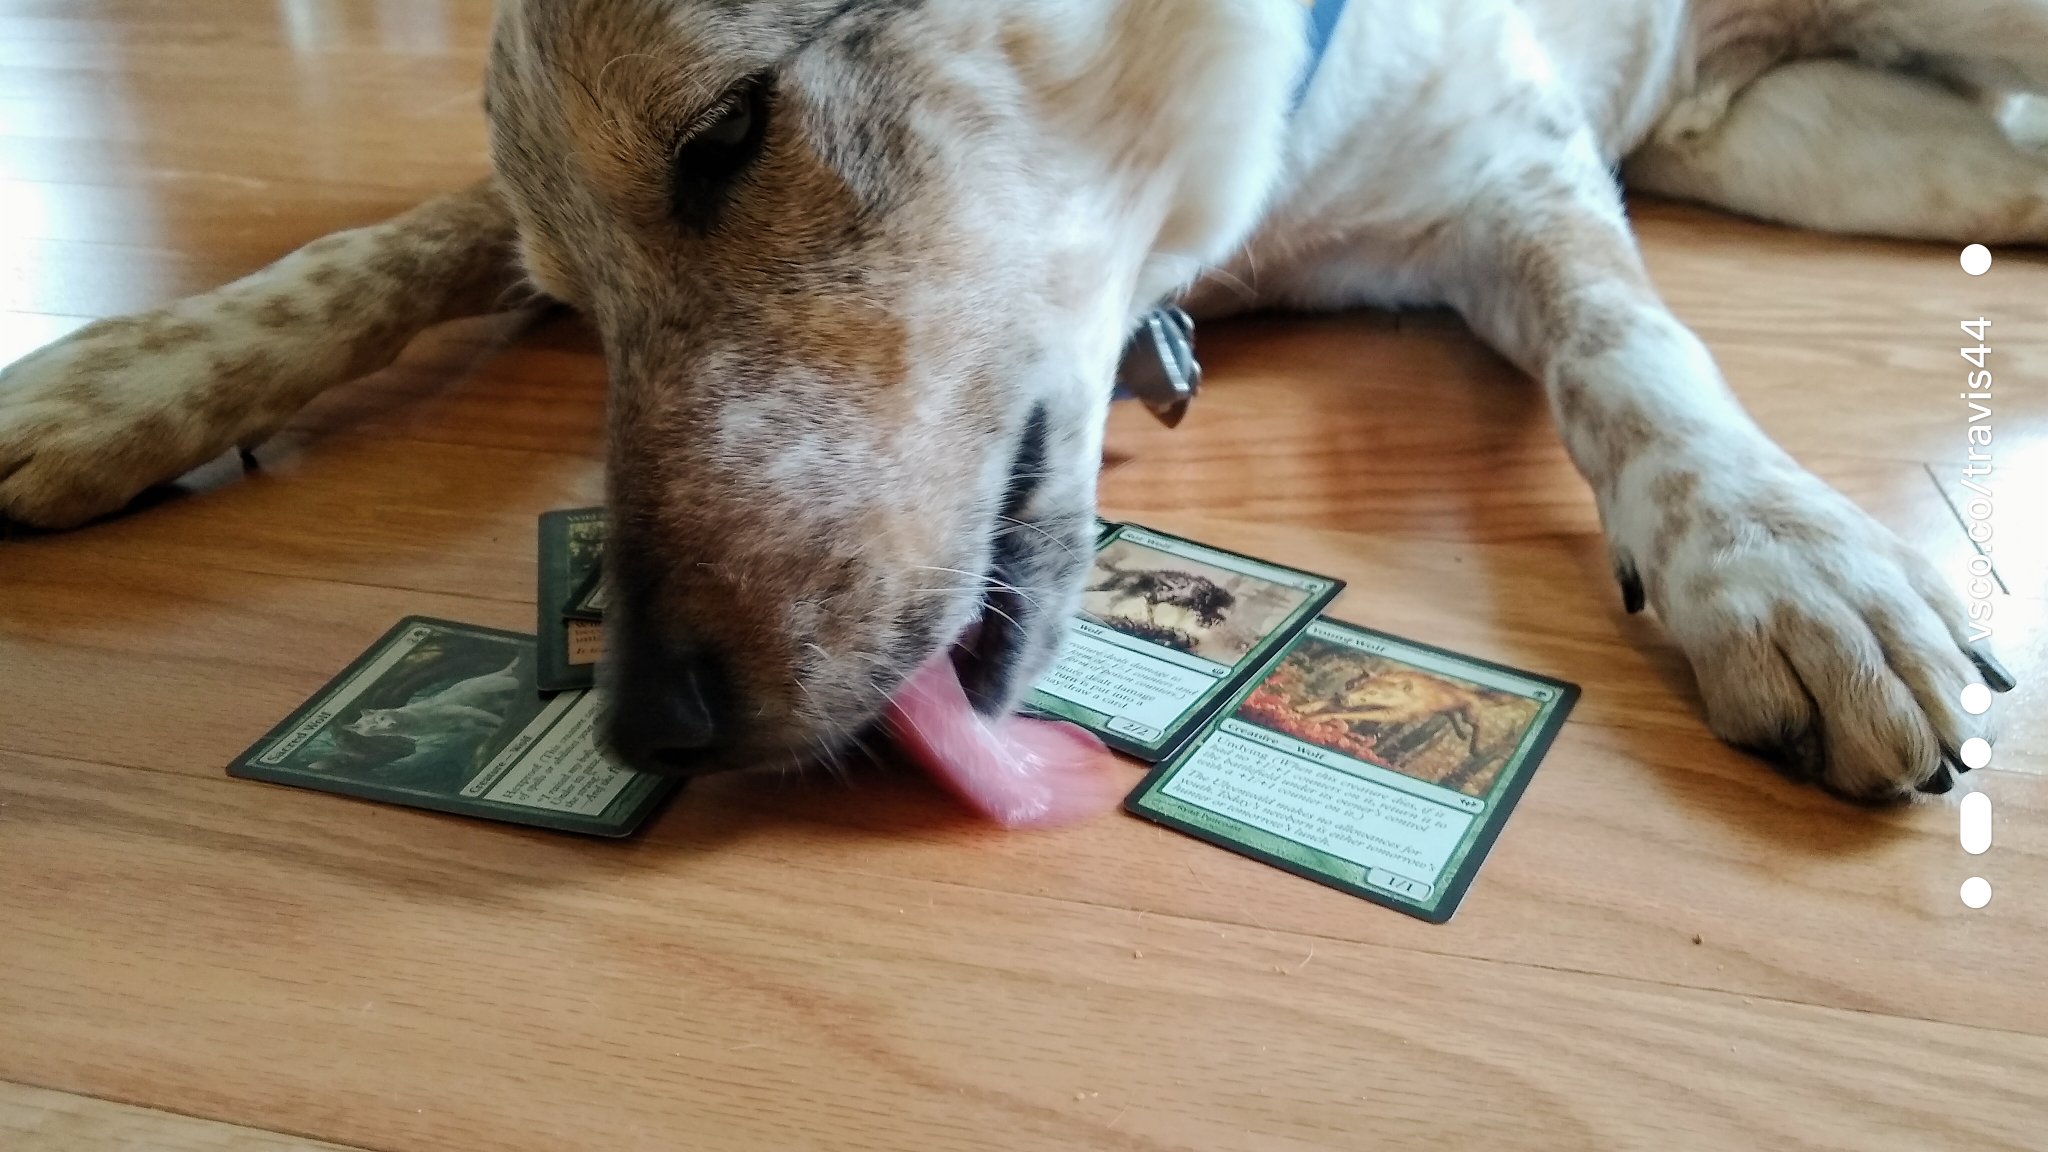 Image of a dog licking the floor with some Magic cards strewn about